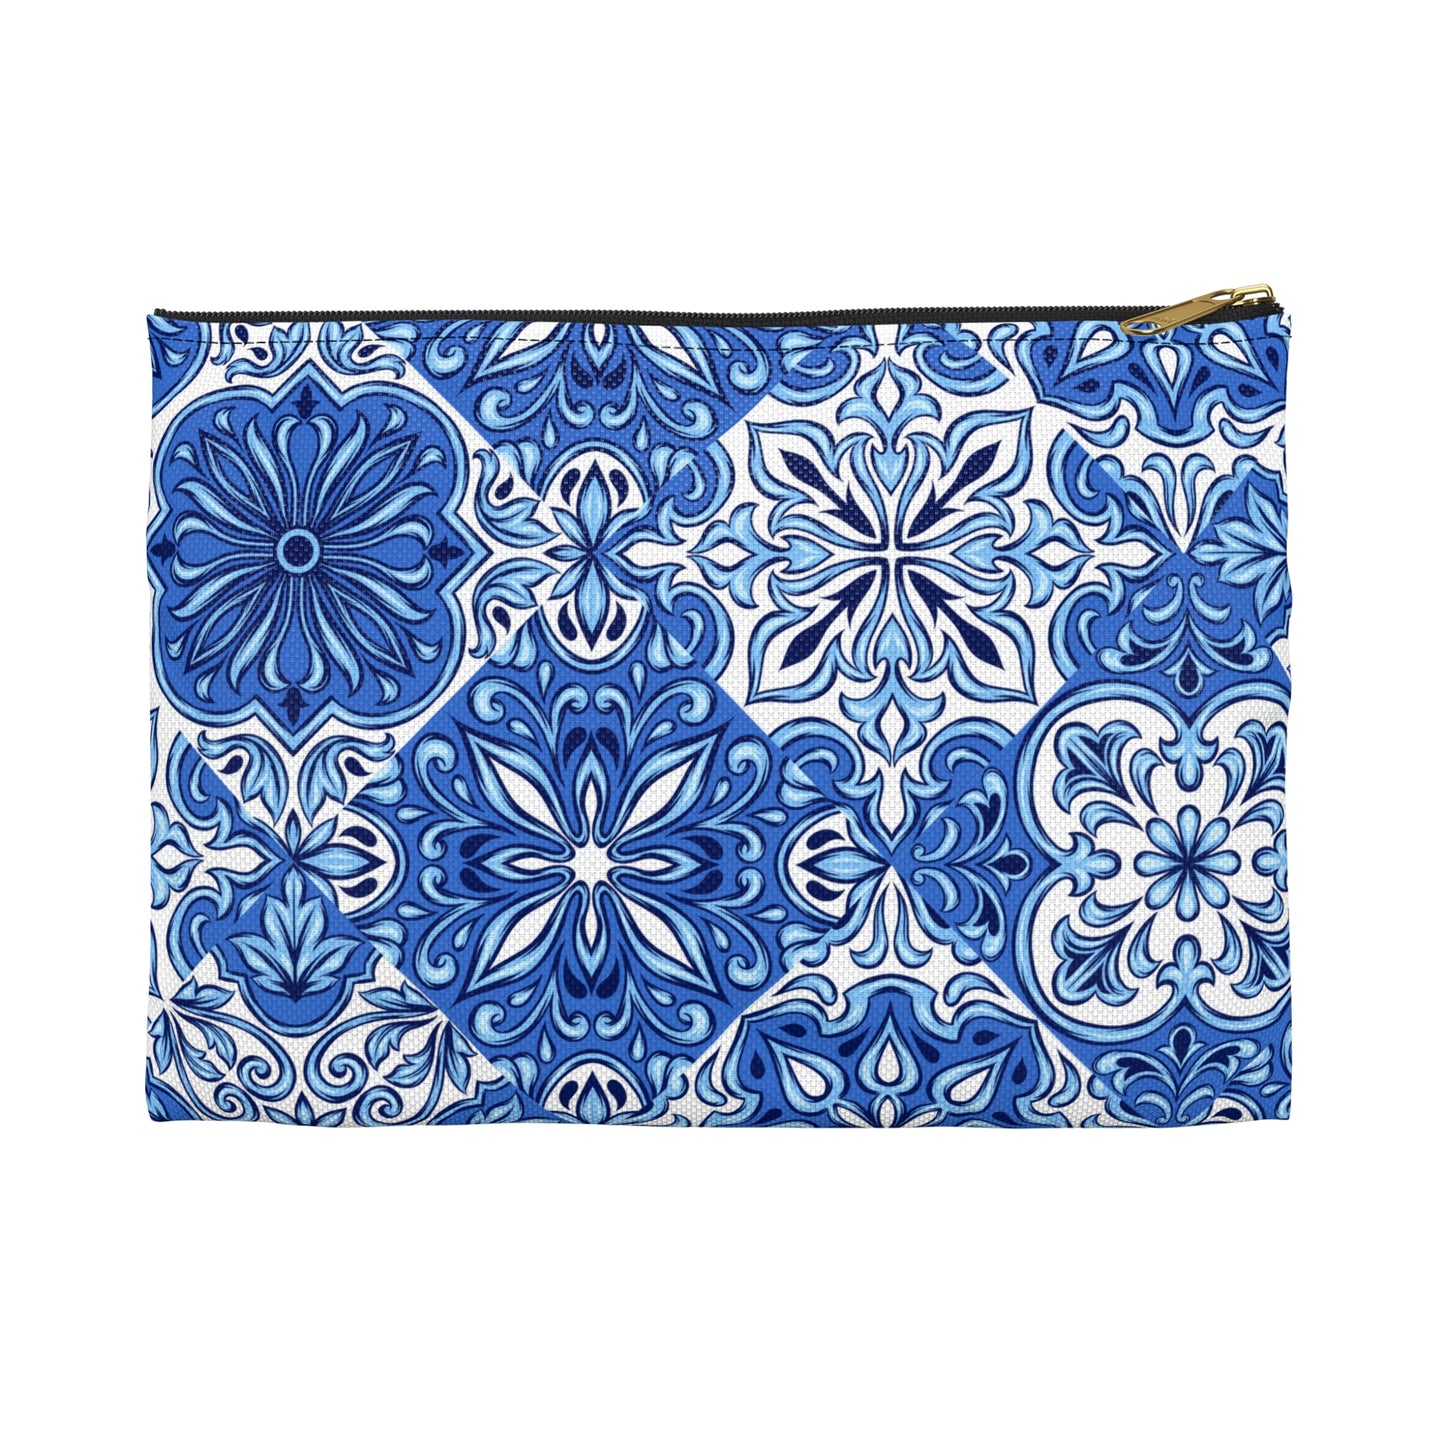 Accessory Pouch Travel Bag Make-up Cosmetic Mosaic Tiles Portugal Blue Spain